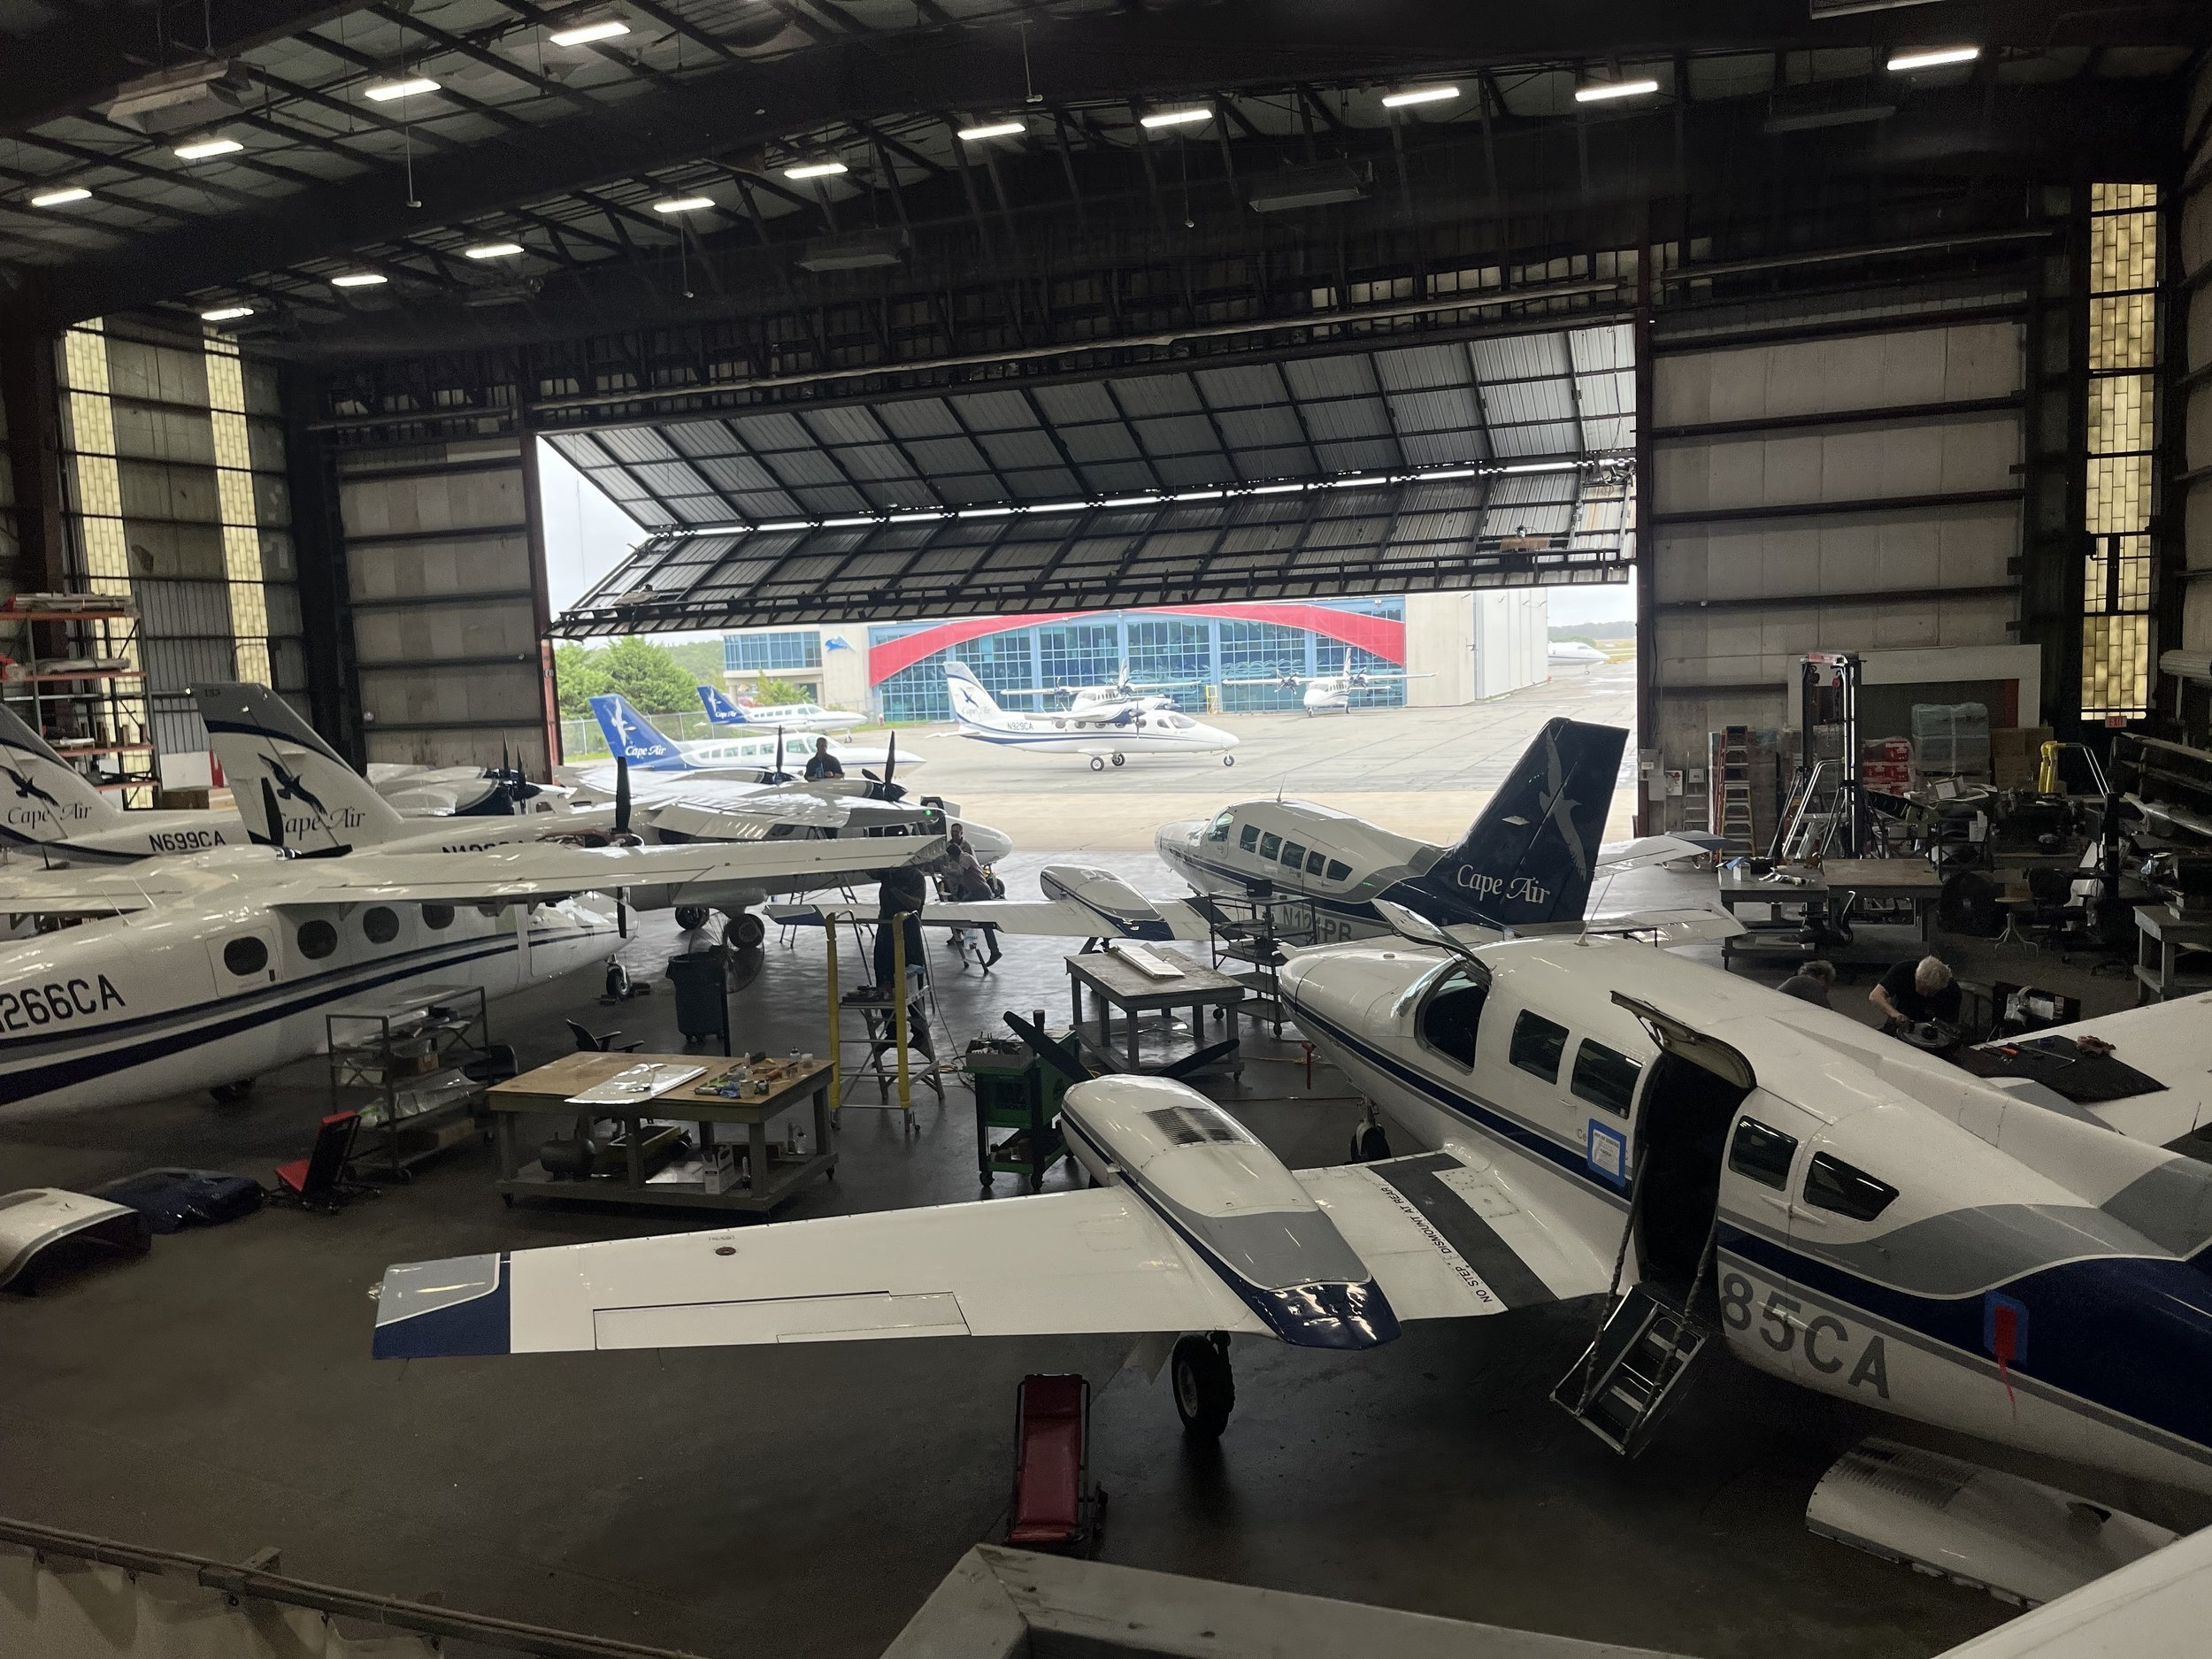  The hangar floor at Cape Air’s HQ in Hyannis, Massachusetts. Photo by Justine Paradis. 